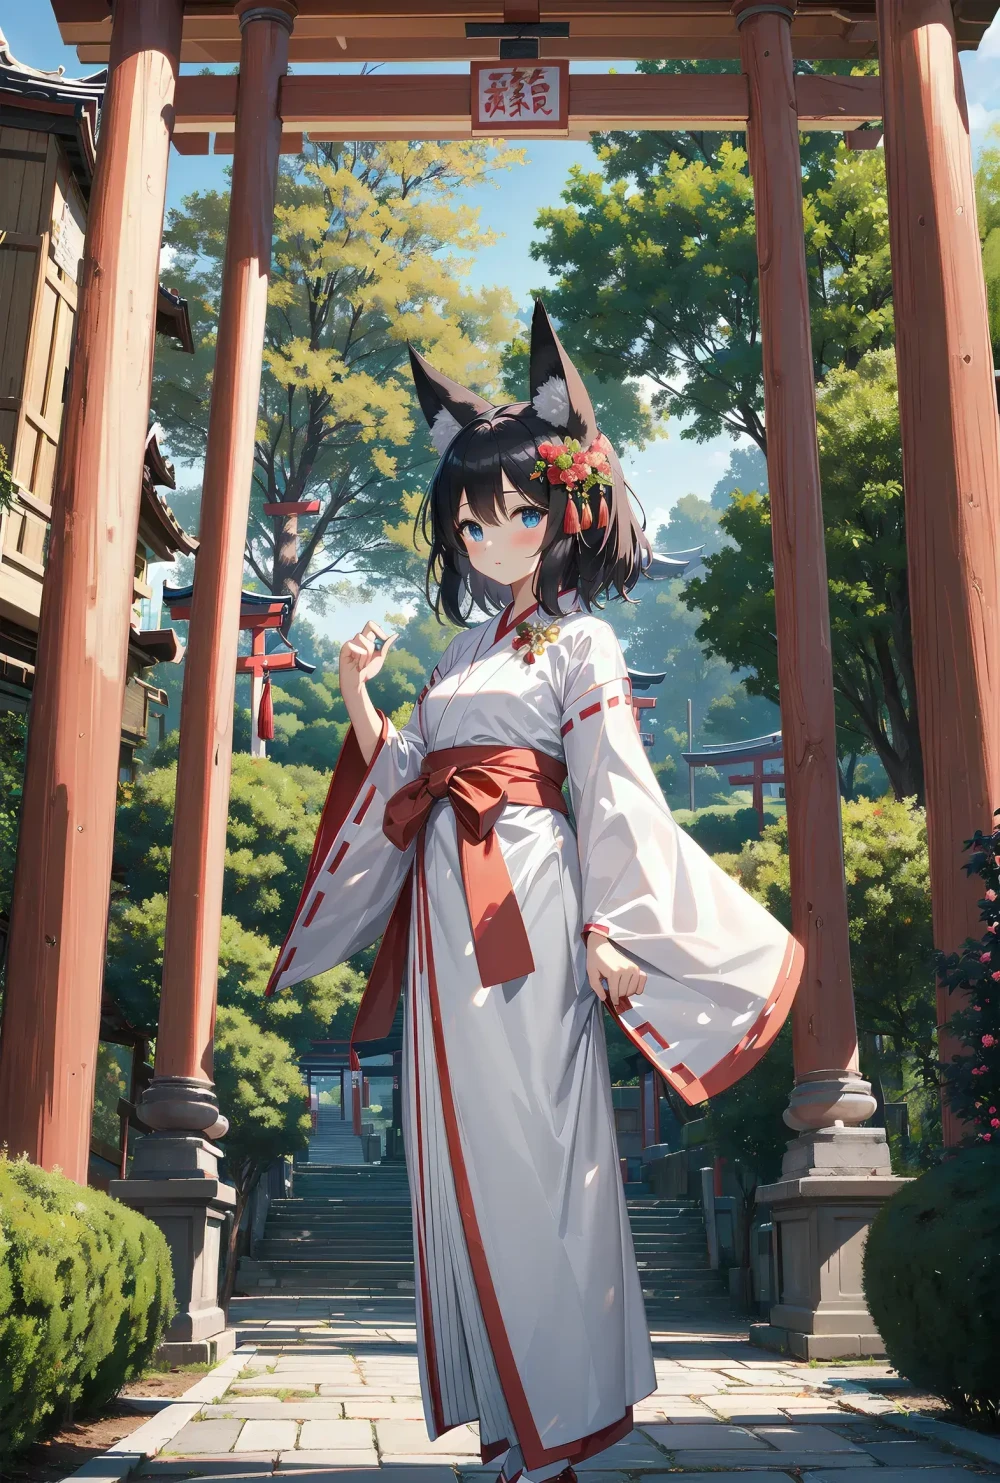 miko-anime-style-all-ages-16